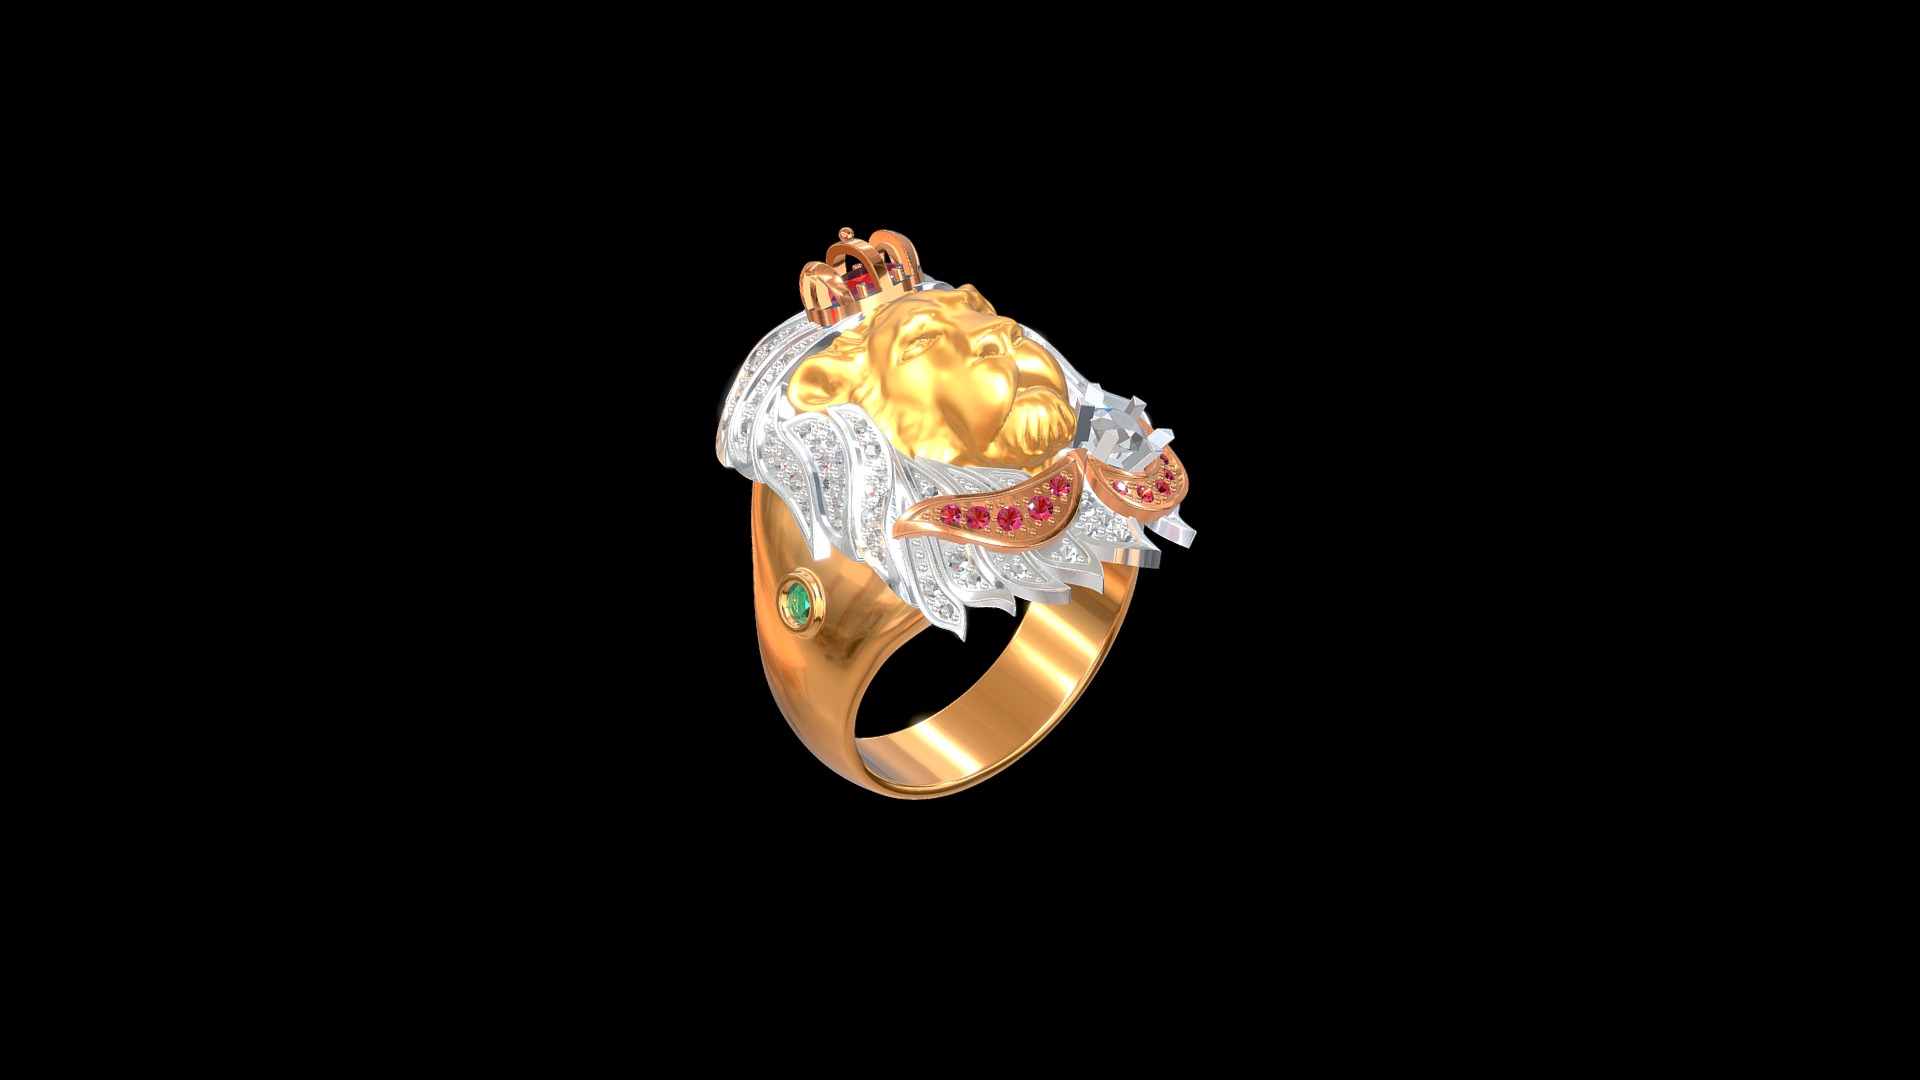 3D model DS007- Lion ring - This is a 3D model of the DS007- Lion ring. The 3D model is about a colorful mask with a black background.